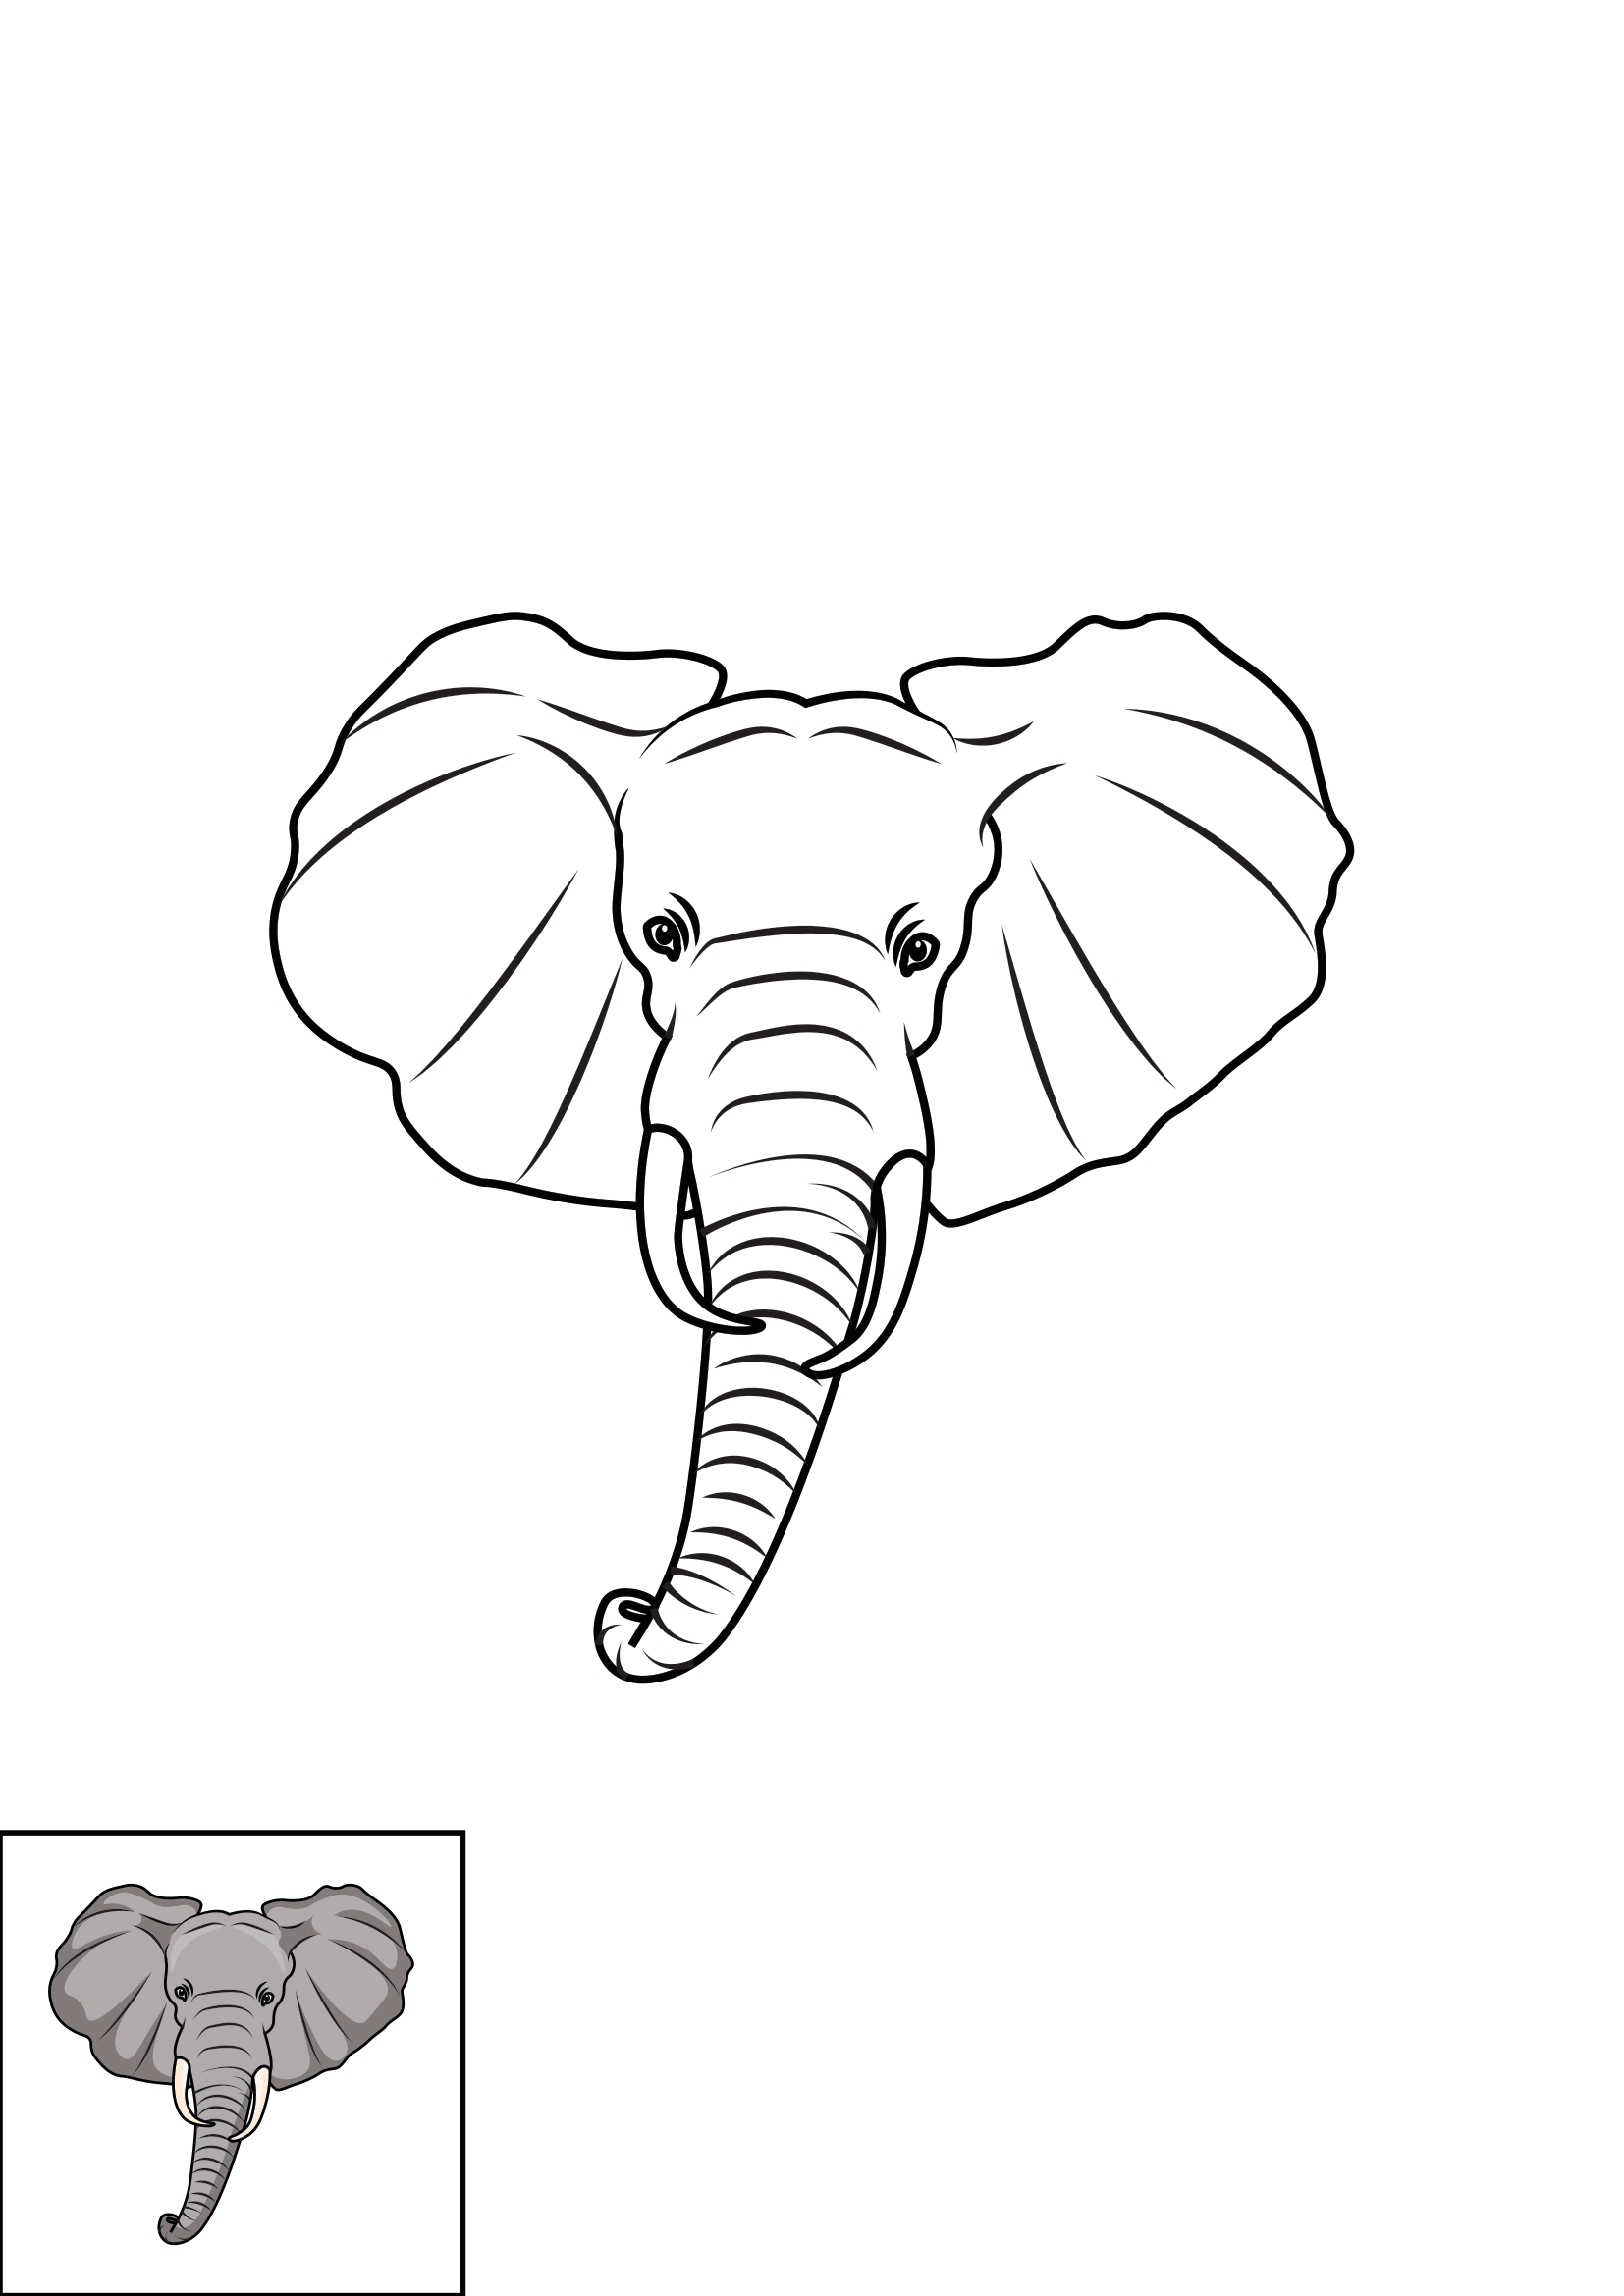 How to Draw An Elephant Head Step by Step Printable Color